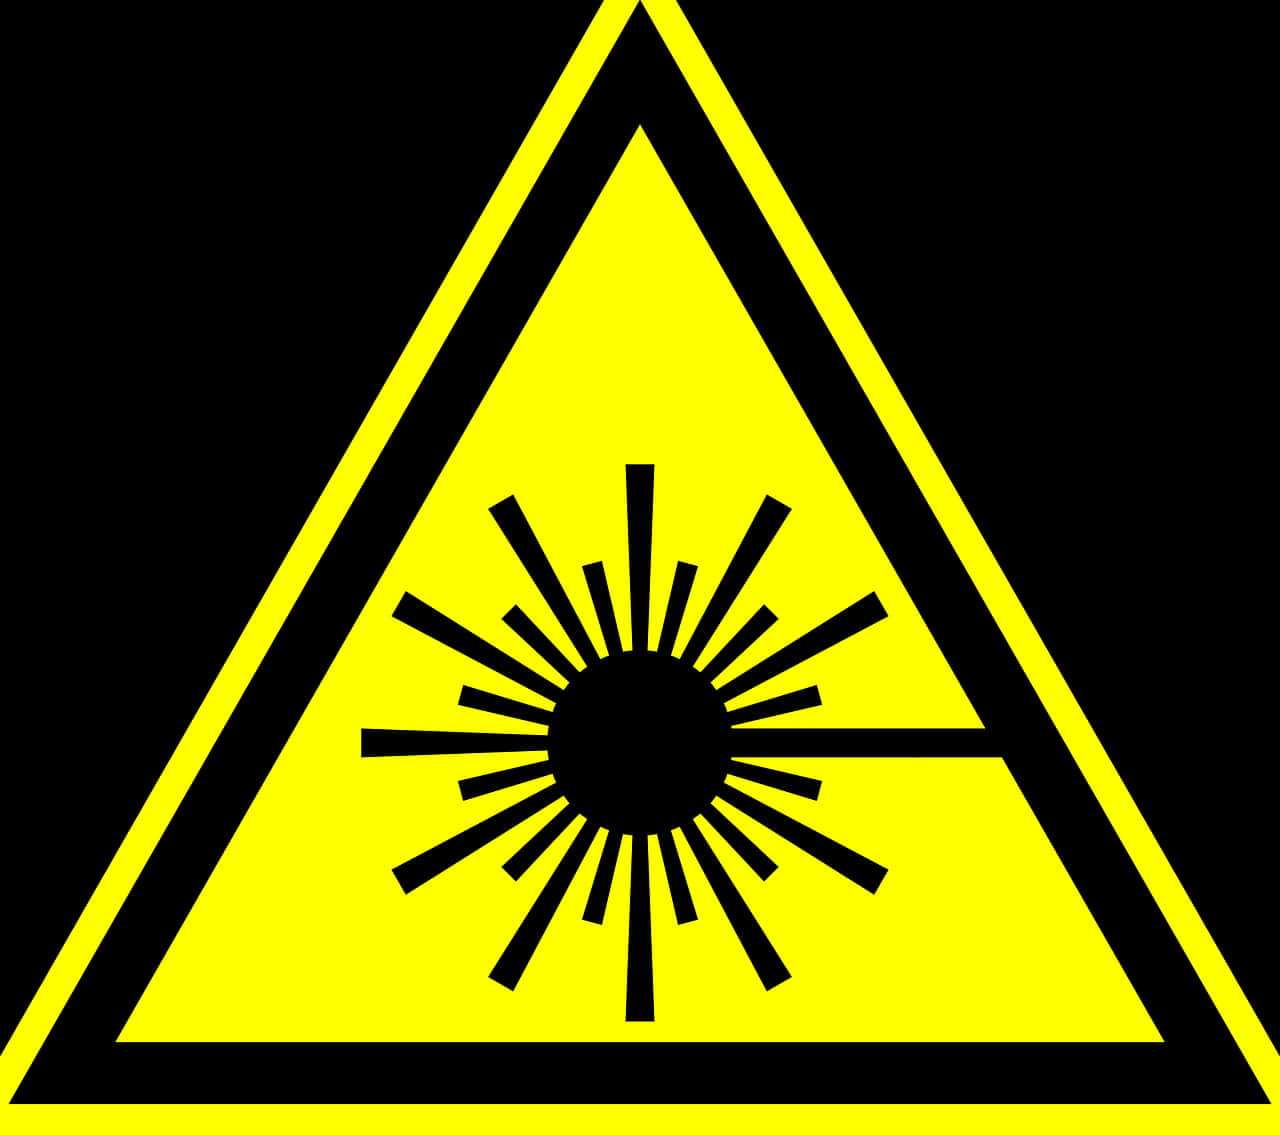 A Yellow Triangle With A Black Sun In The Center